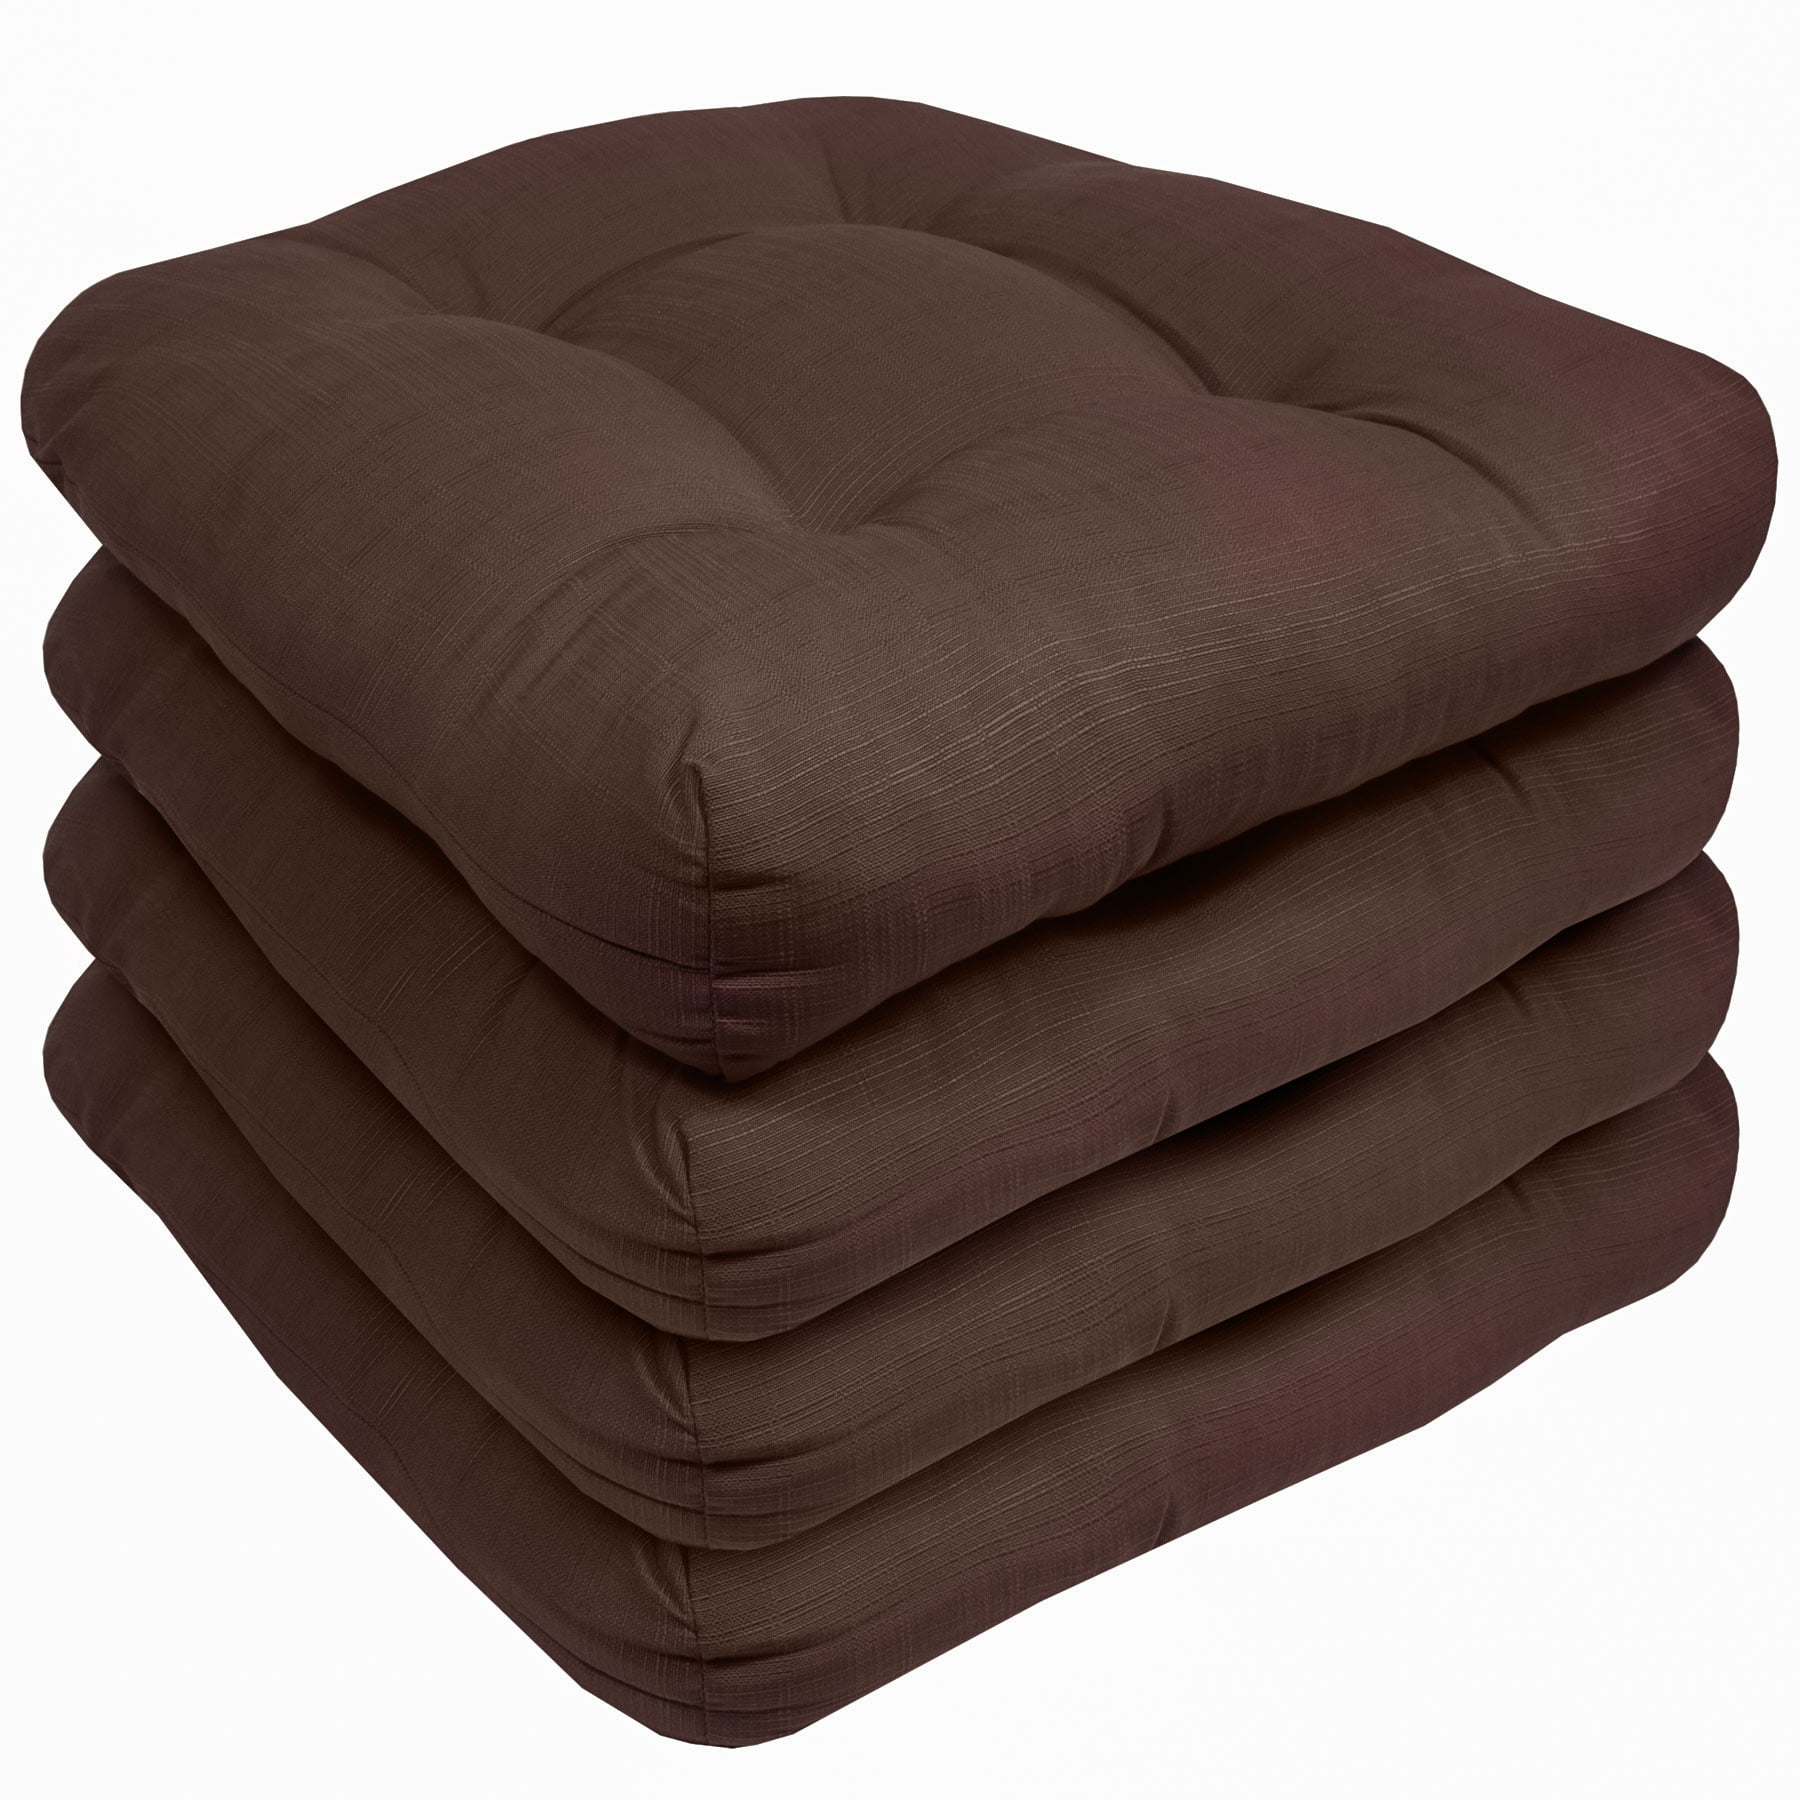 Indoor-Outdoor Reversible Patio Seat Cushion Pad 4 Pack - Chocolate 19